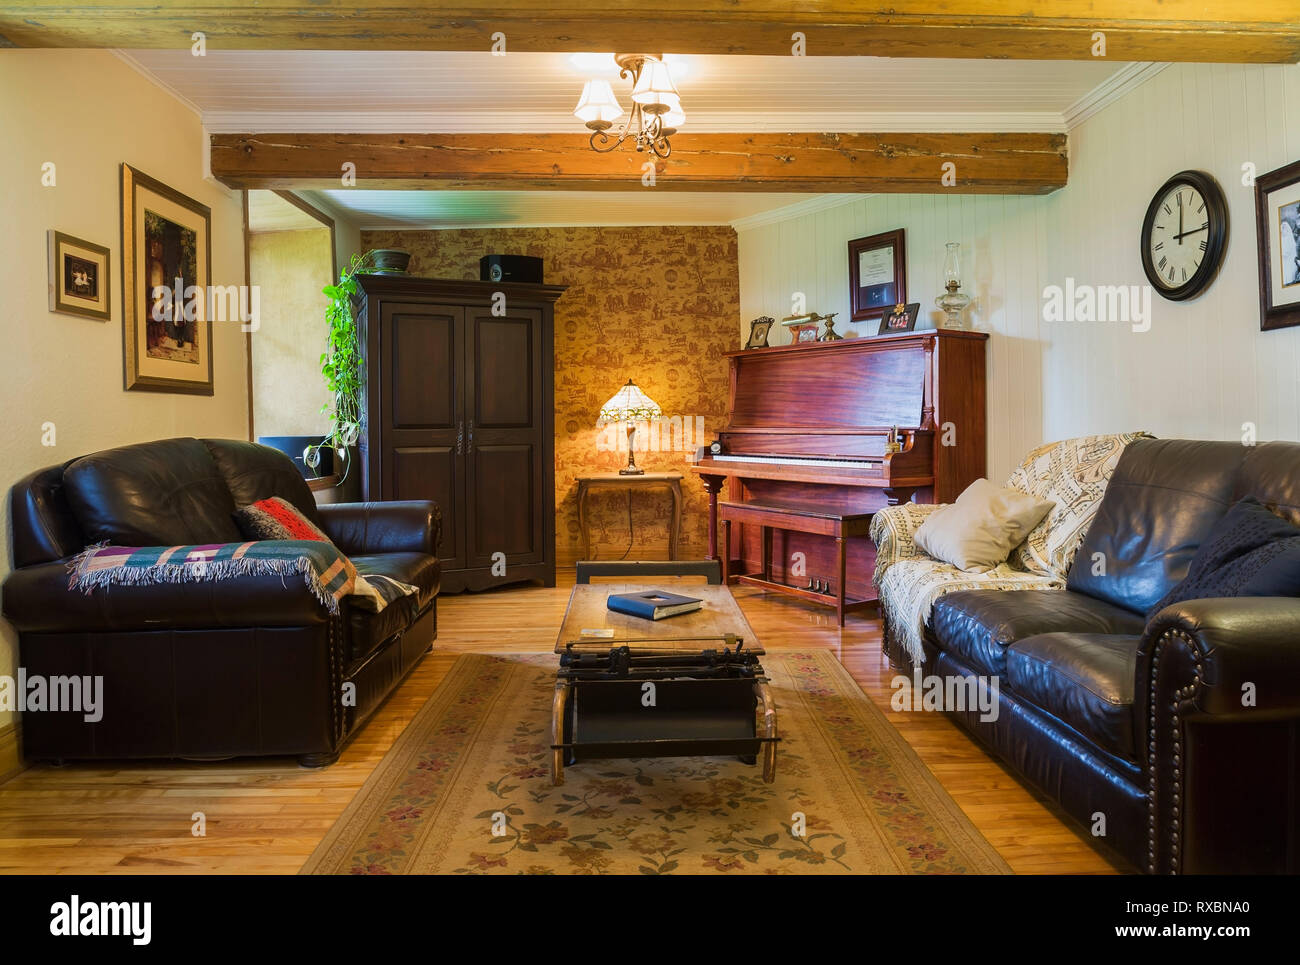 Music room with dark brown leather sofas, upright piano, wooden armoire and old grain scale table inside an old circa 1752 Canadiana style fieldstone house, Quebec, Canada. This image is property released. CUPR0313 Stock Photo